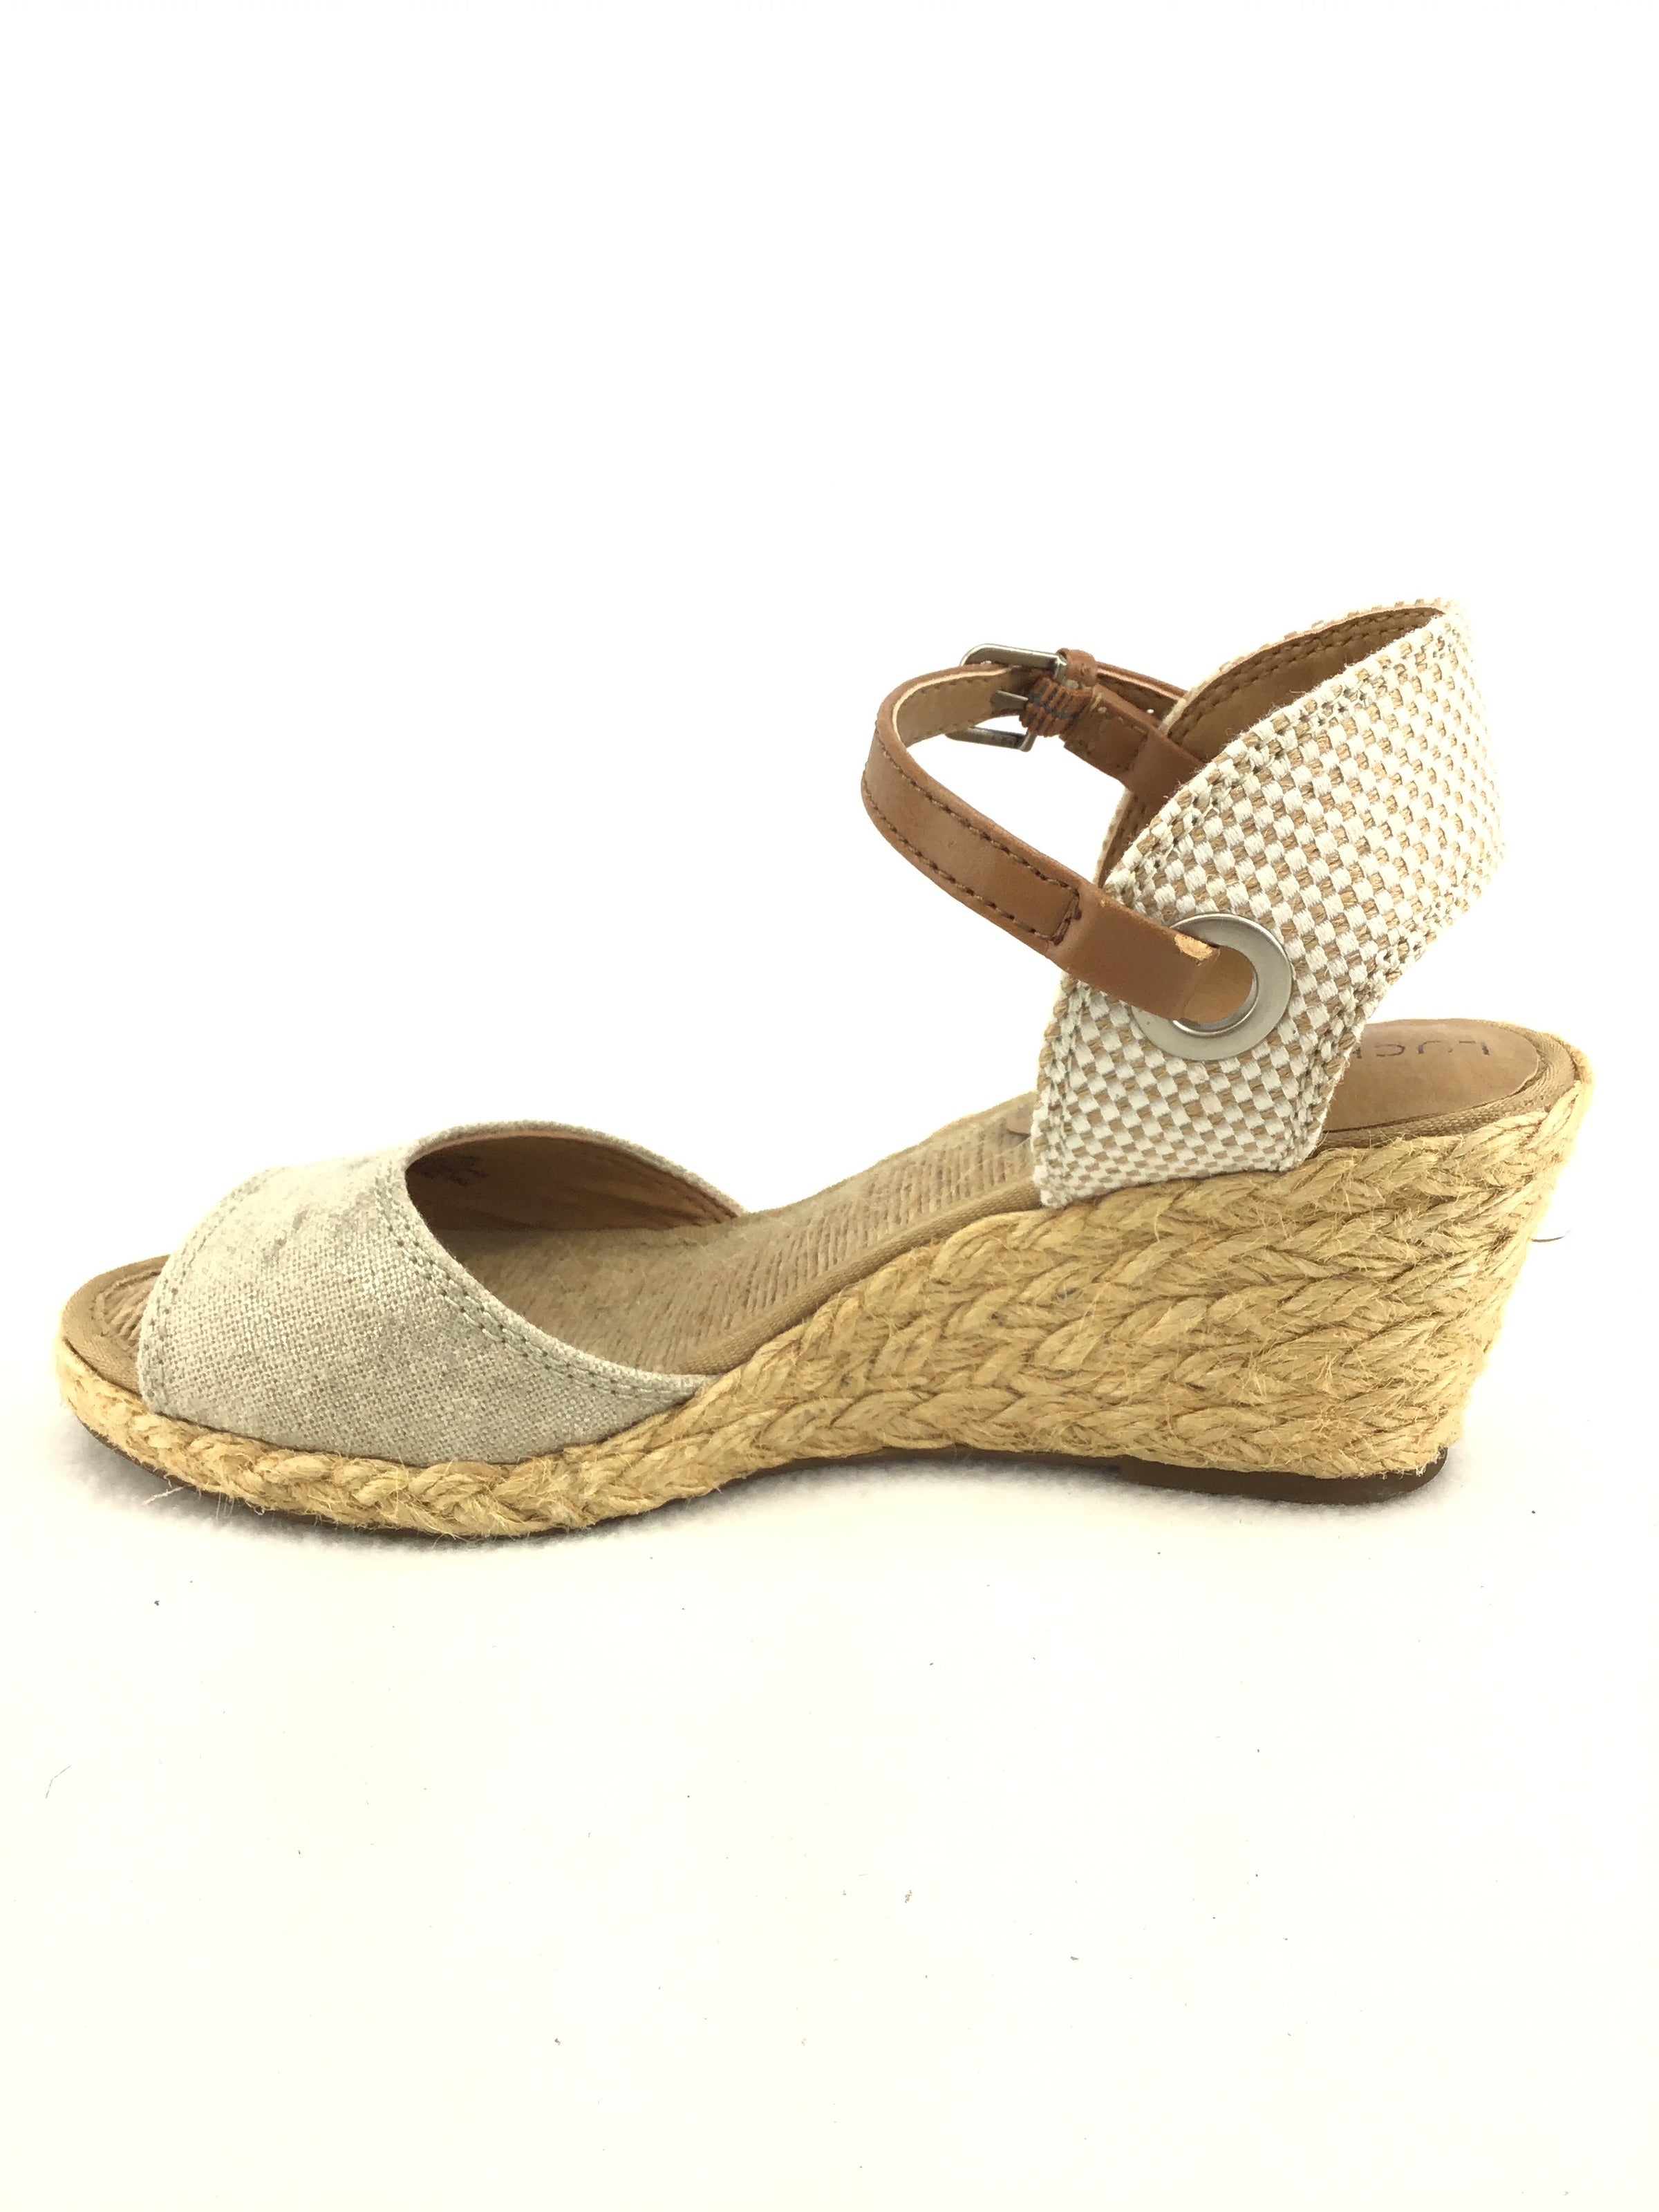 Lucky Brand Kyndra Wedge Sandals Size 5.5M